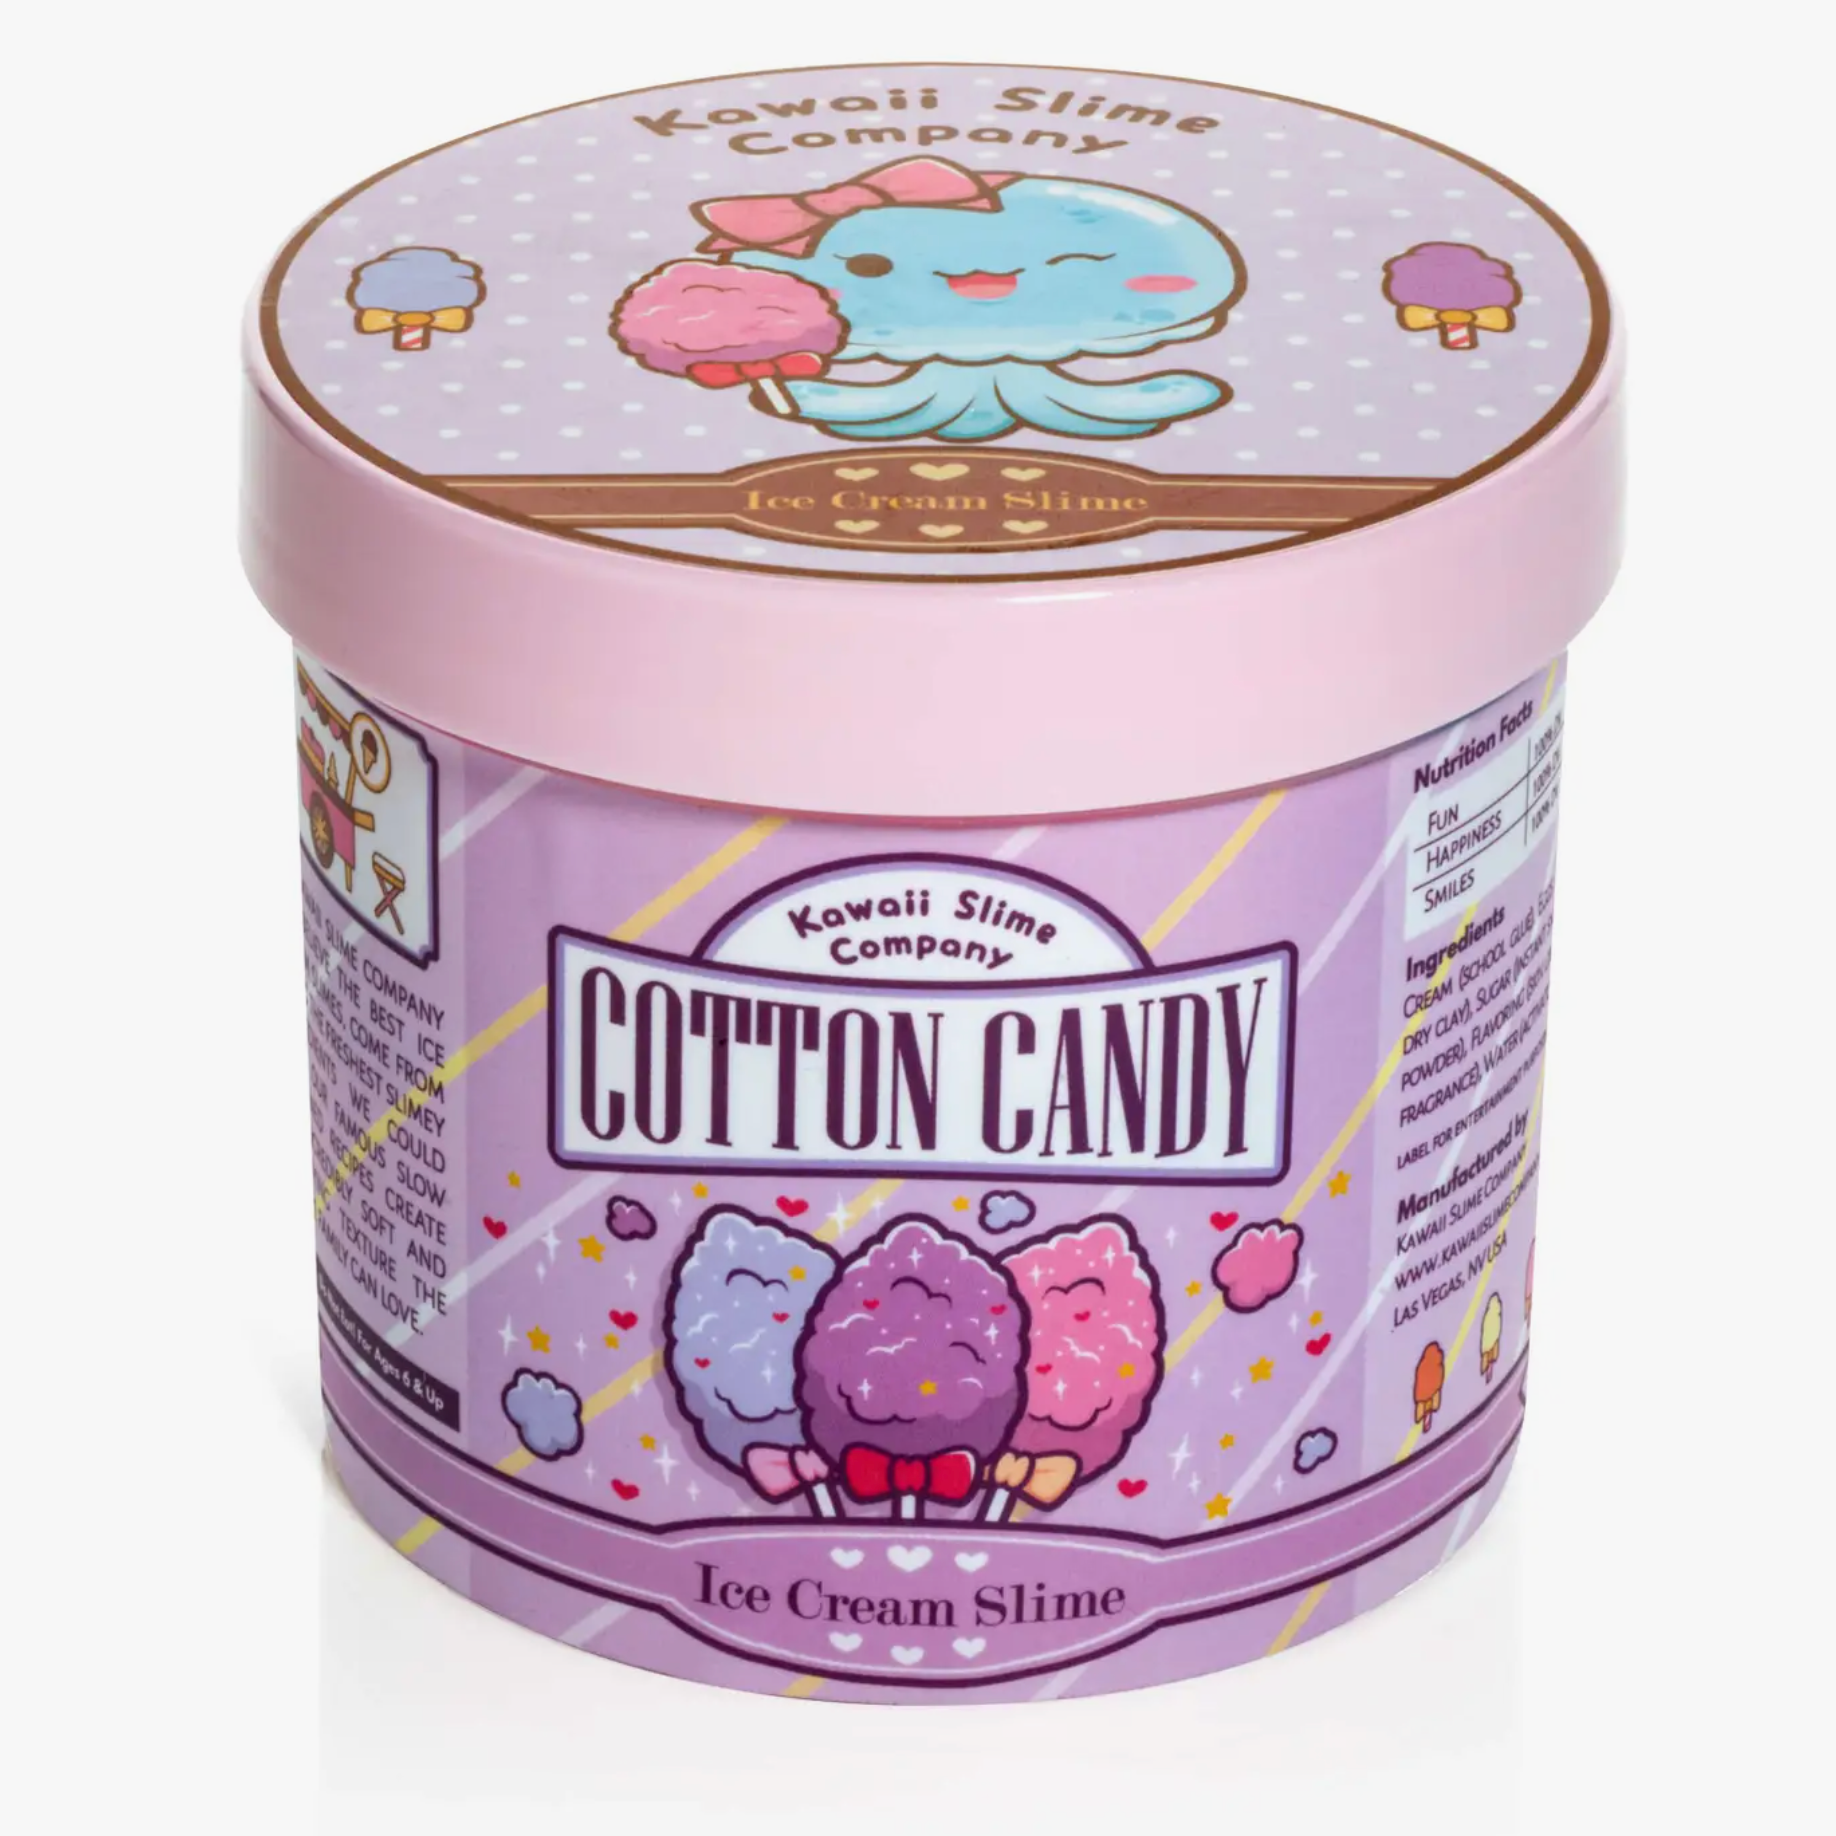 Cotton Candy Ice Cream Pint Slime